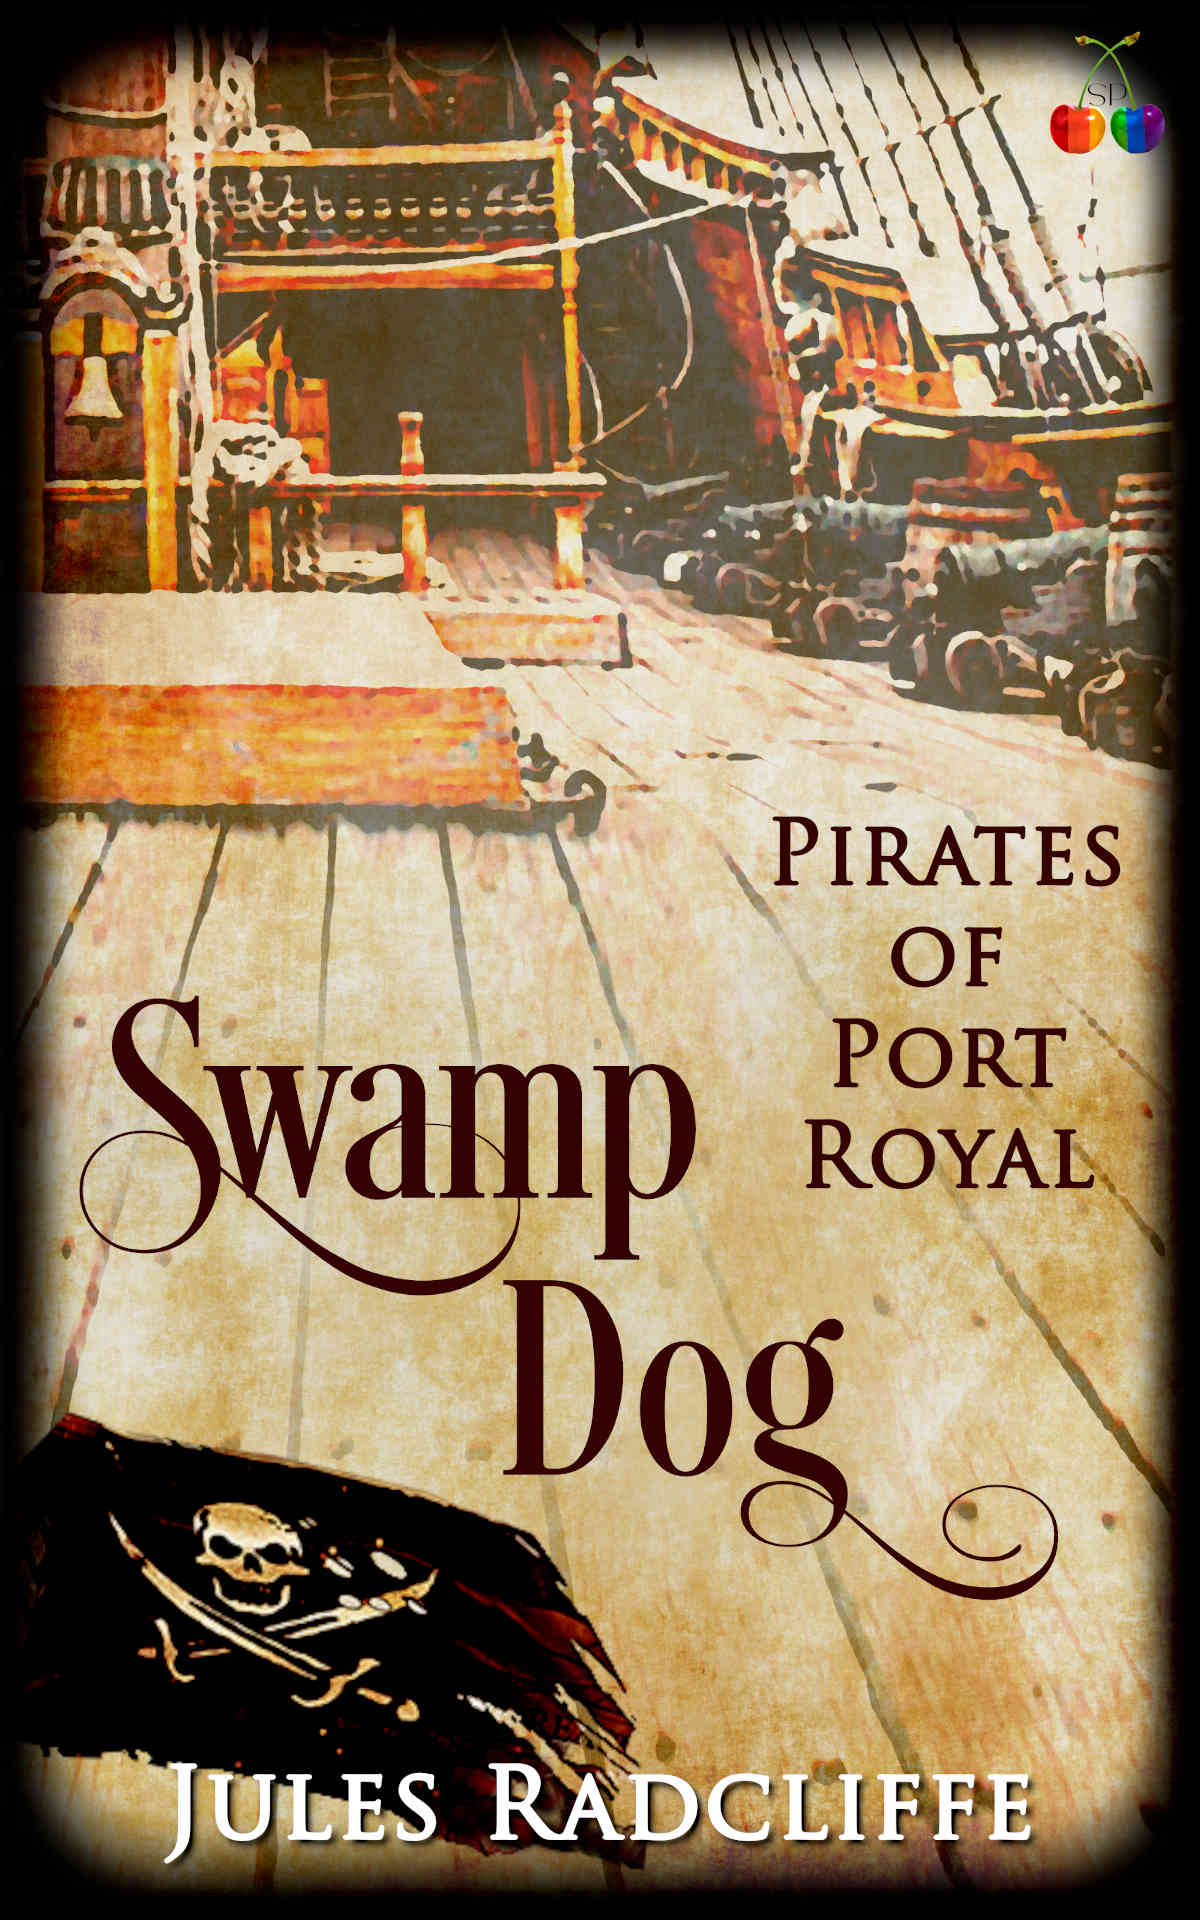 Cover of Swamp Dog by Jules Radcliffe